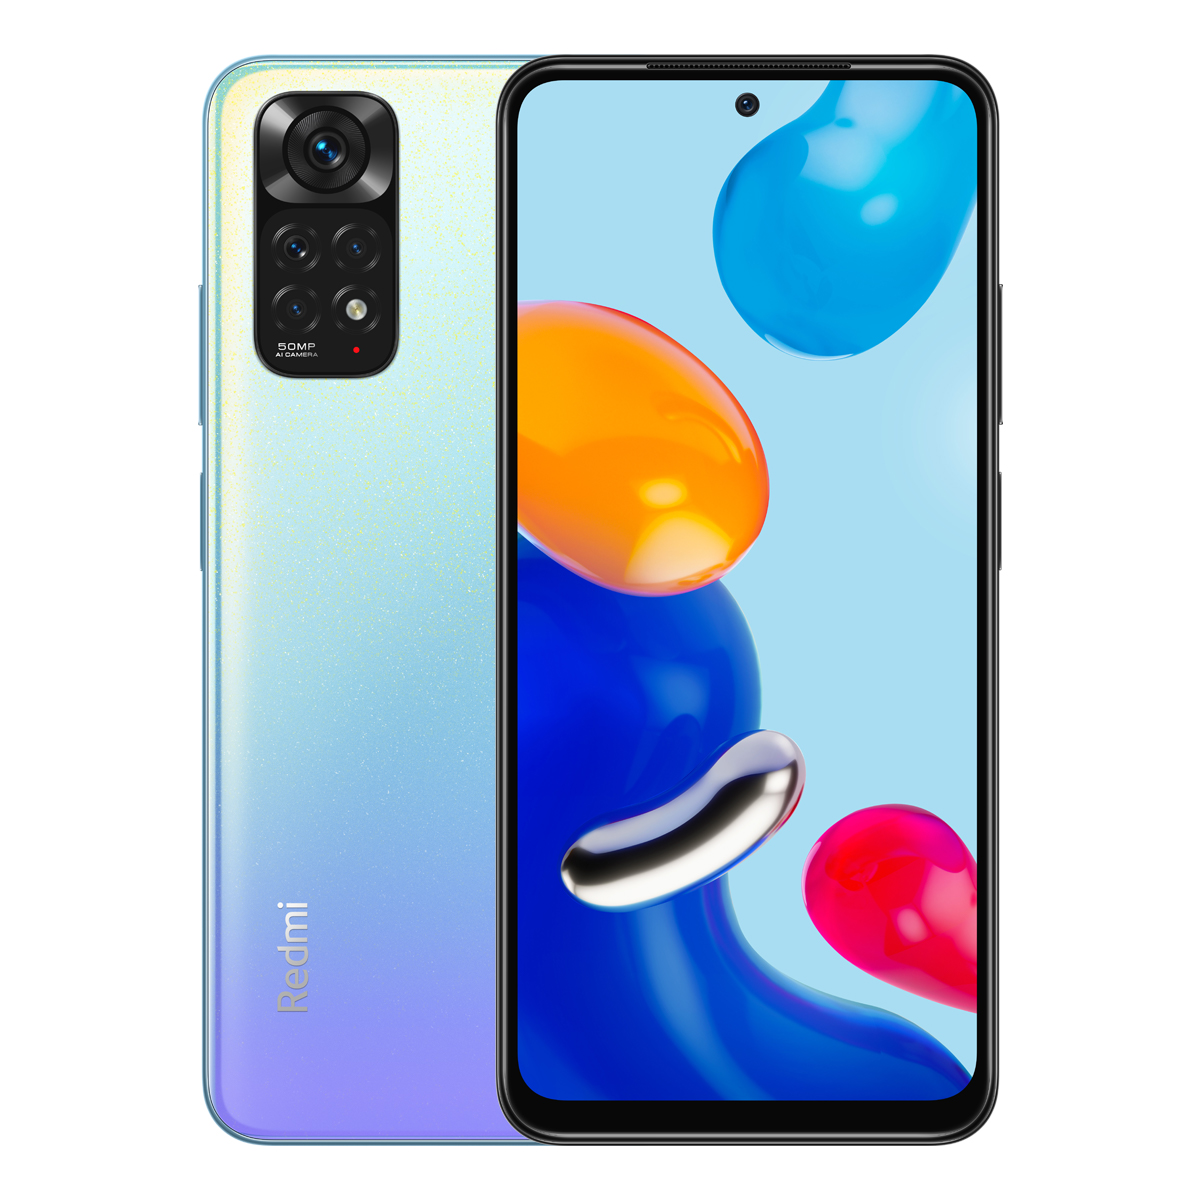 Find Xiaomi Redmi Note 11 Global Version Snapdragon 680 50MP Quad Camera 33W Pro Fast Charge 64GB 128GB 6 43 inch 90Hz AMOLED Octa Core 4G Smartphone for Sale on Gipsybee.com with cryptocurrencies